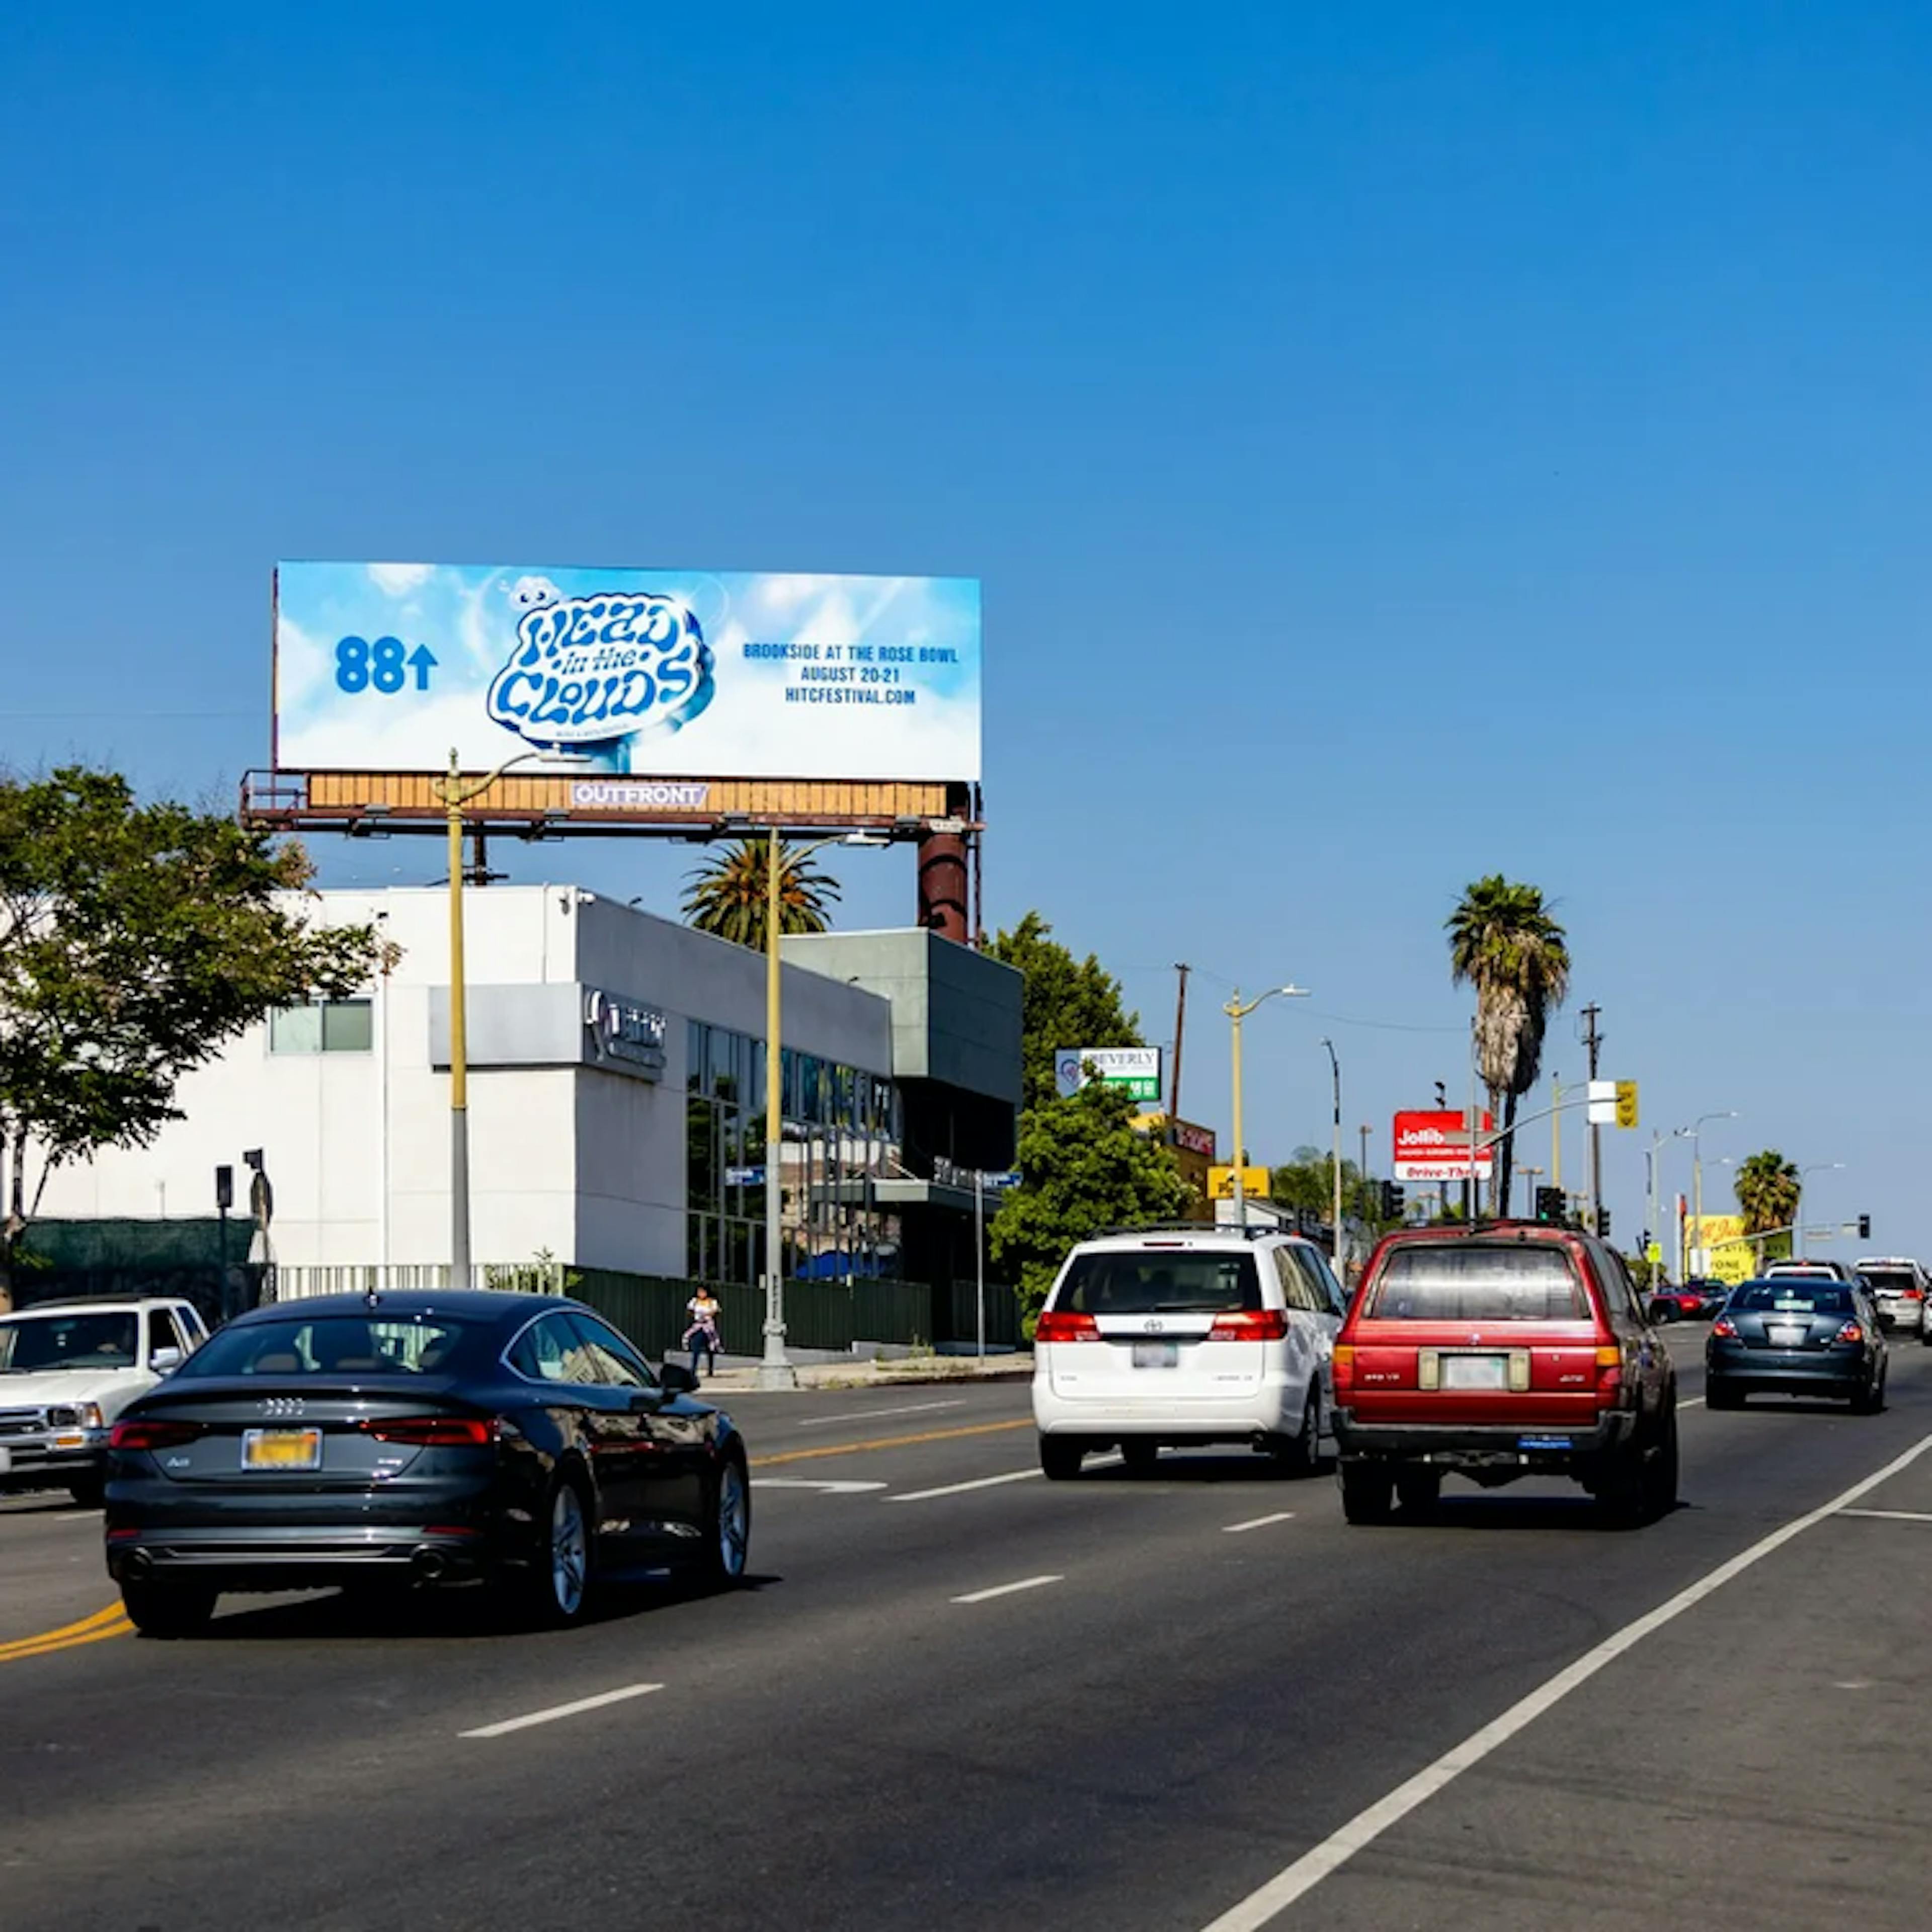 An image of a bustling city street under a clear blue sky, featuring a prominent billboard advertisement for the 'Head In The Clouds' Music & Arts Festival by 88rising. The billboard, set against the backdrop of a bright day, displays the festival's distinctive cloud-shaped logo in white and blue with the 88rising emblem, announcing the event at Brookside at the Rose Bowl on August 20-21. Vehicles are seen passing by on the road, indicating the billboard's roadside location in an active urban environment.